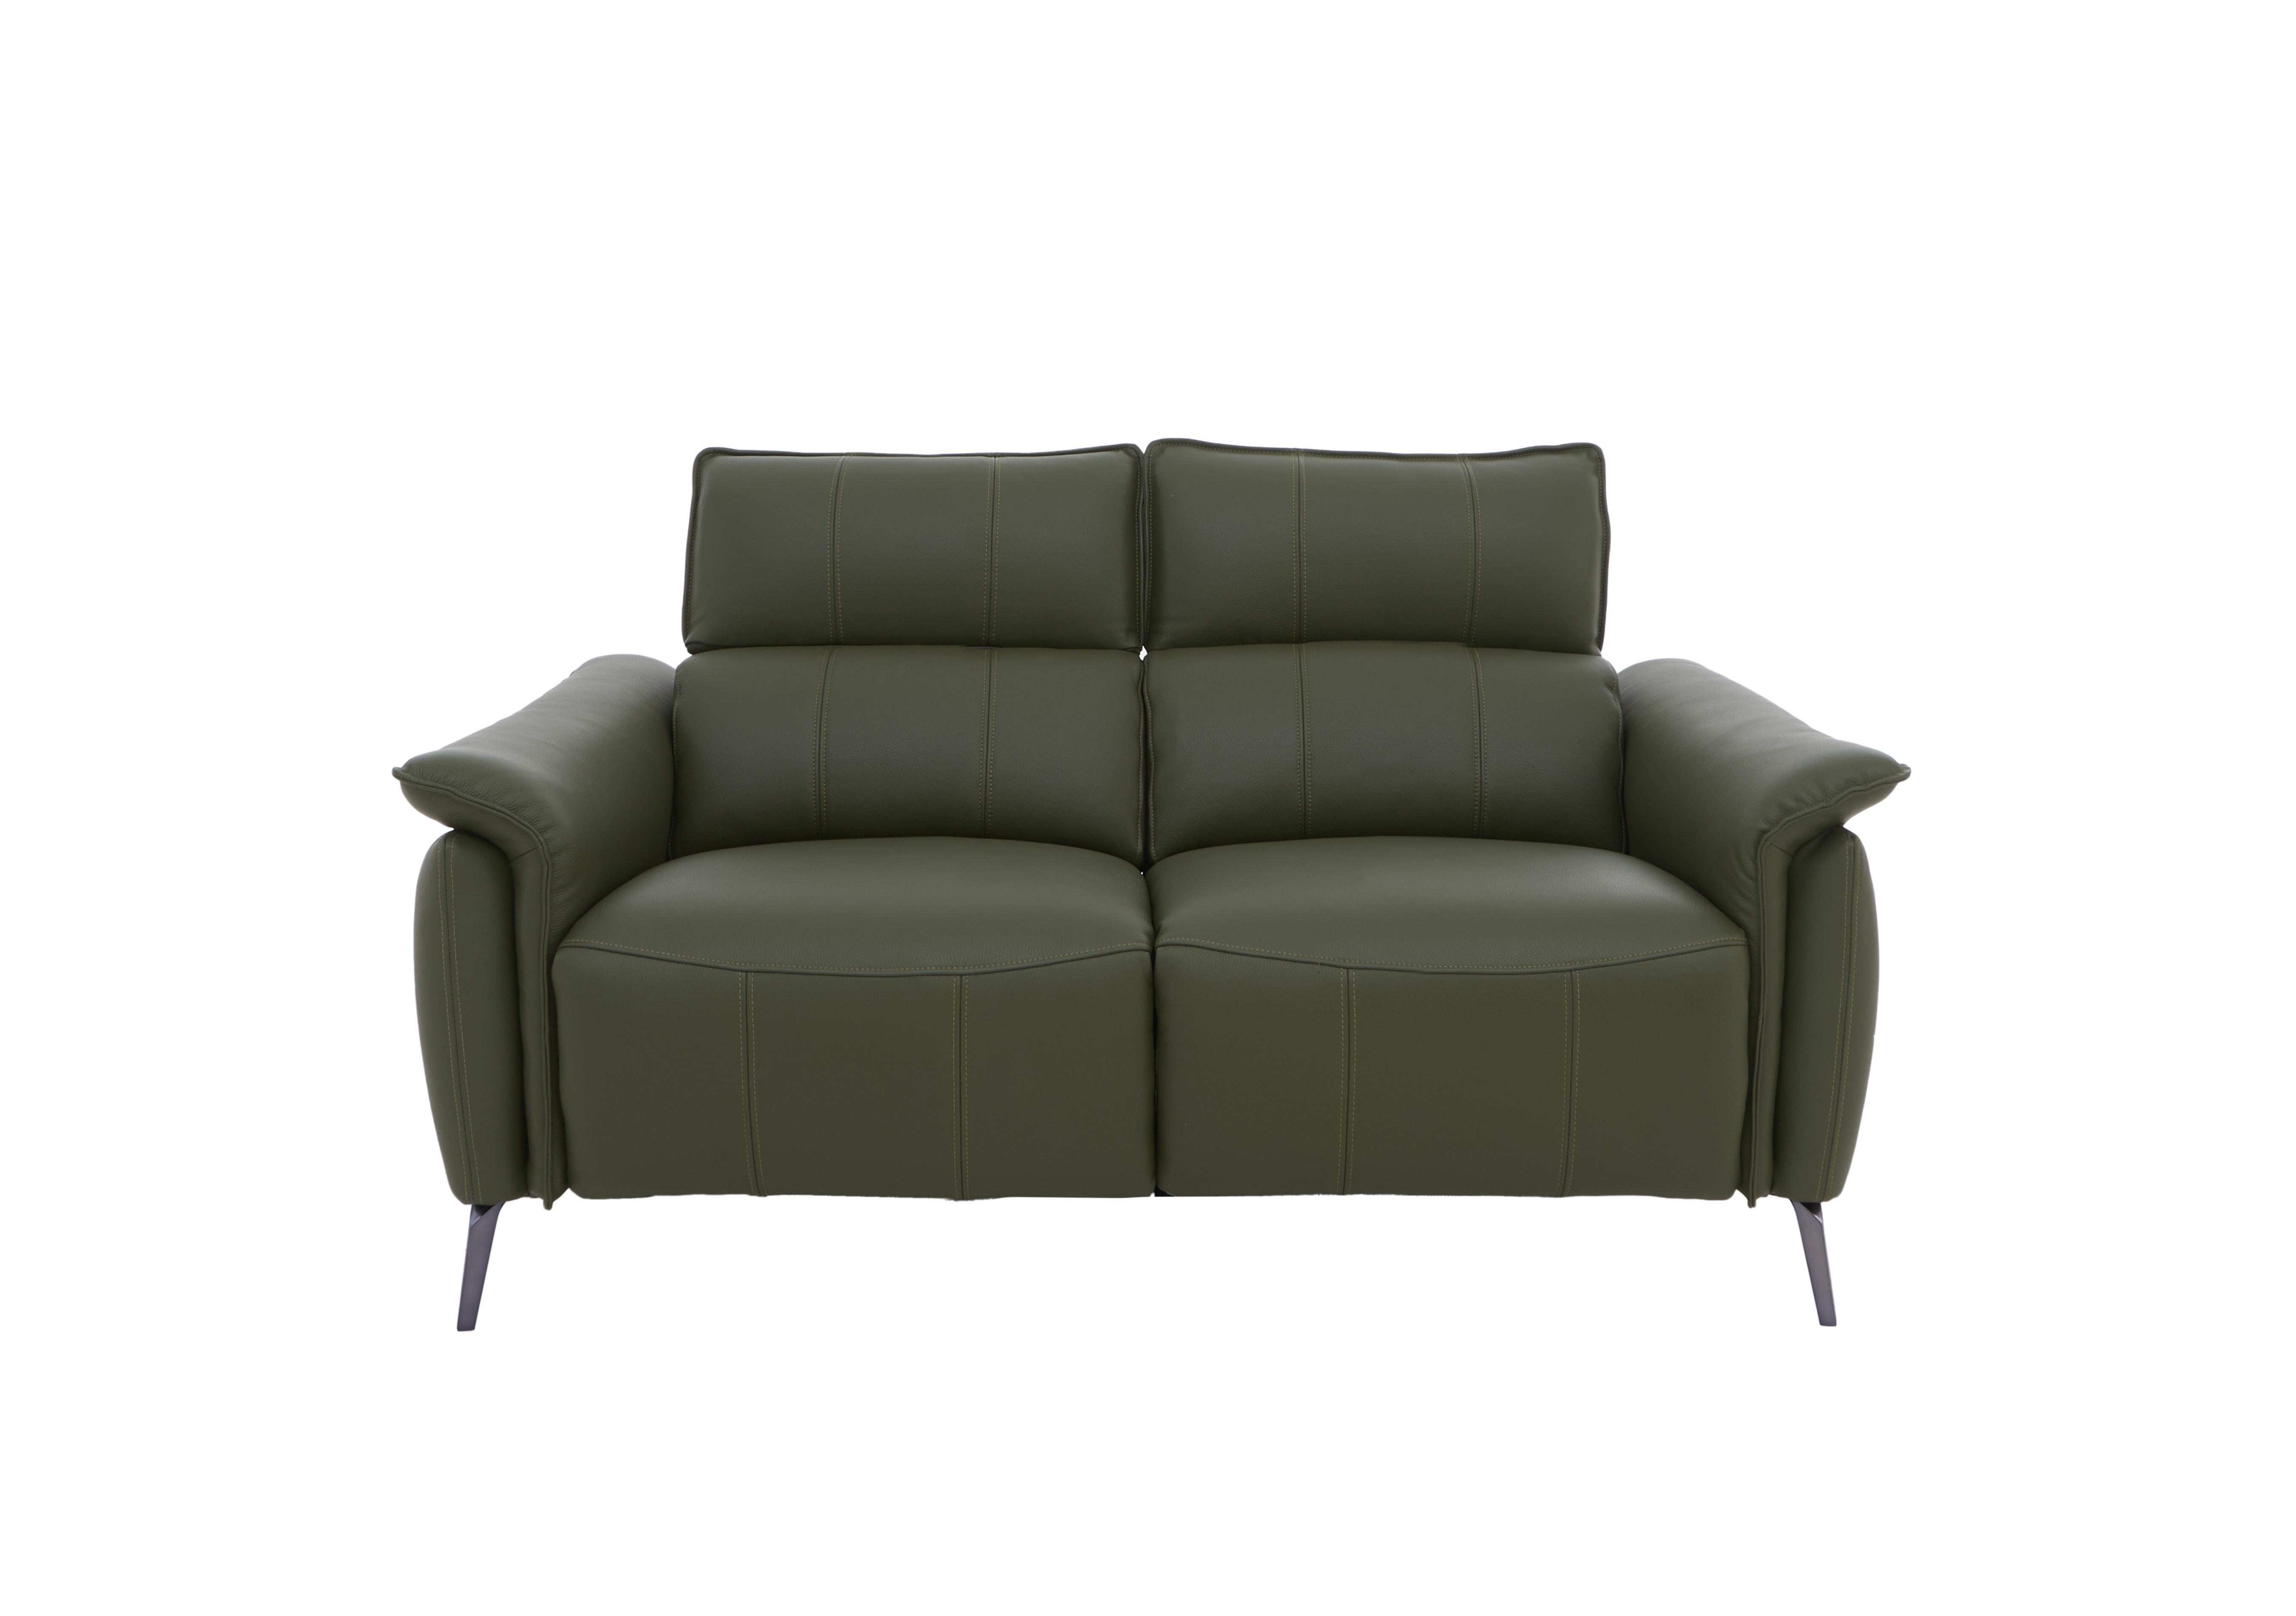 Jude 2 Seater Leather Sofa in Montana Oslo Pine Cat-40/10 on Furniture Village